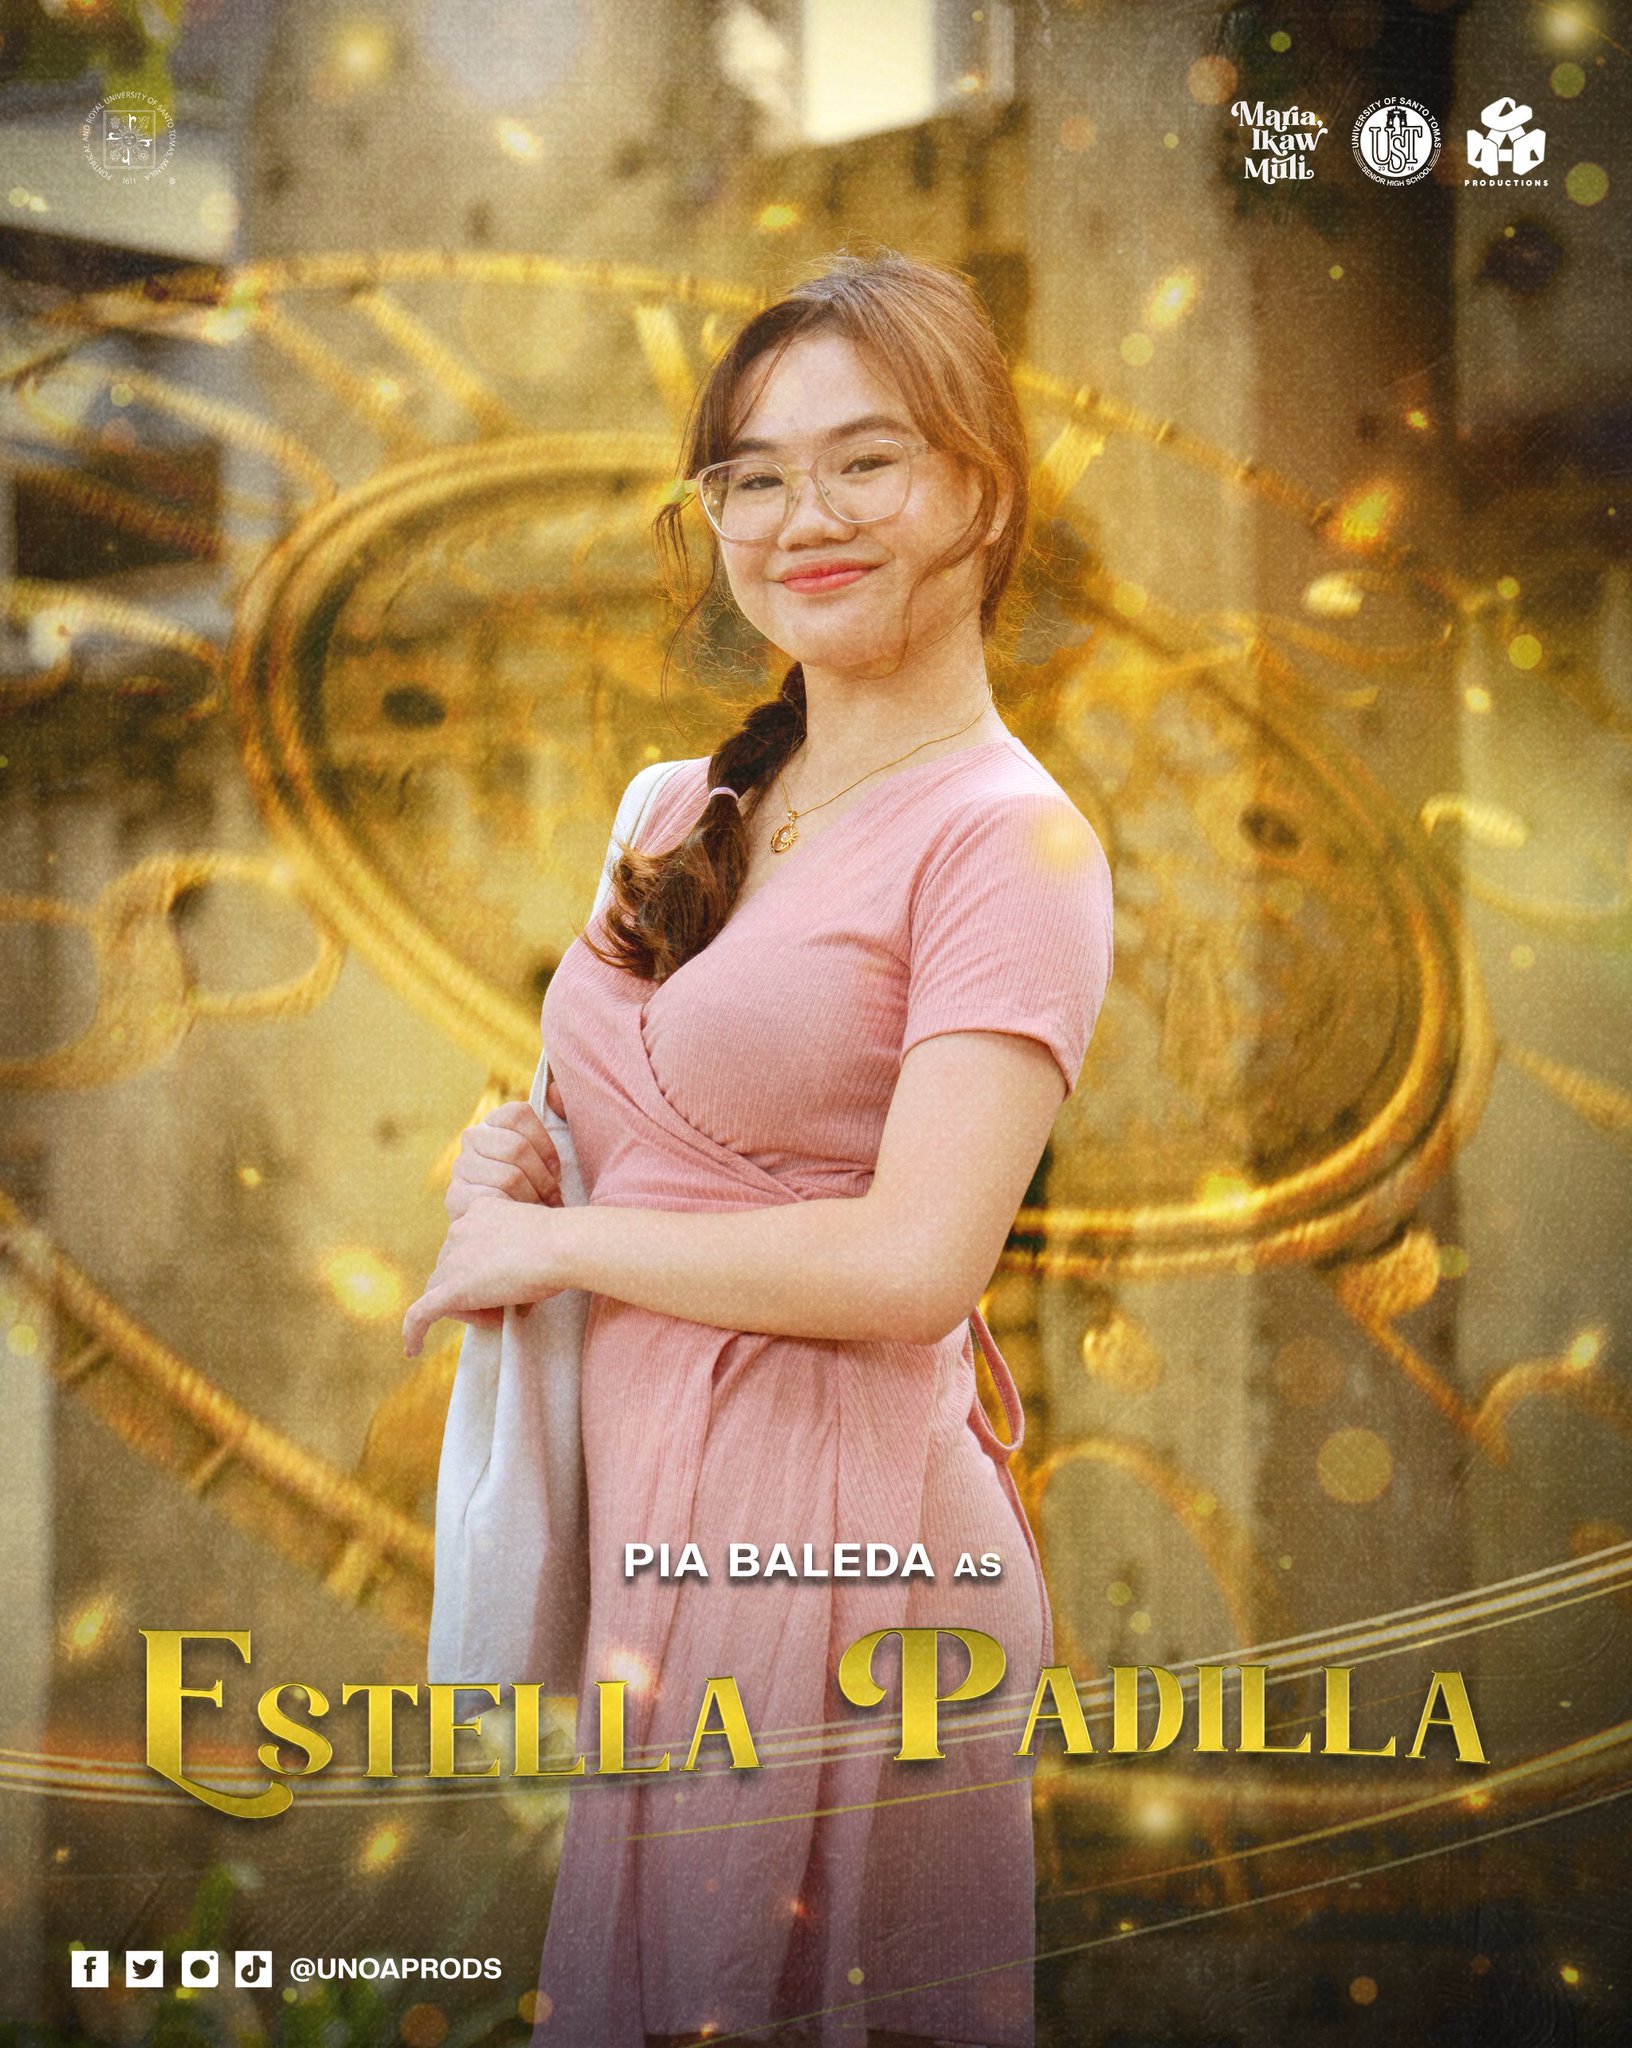 UNO-A Productions on Twitter: " "I am Estella, isang probinsyana gurlie